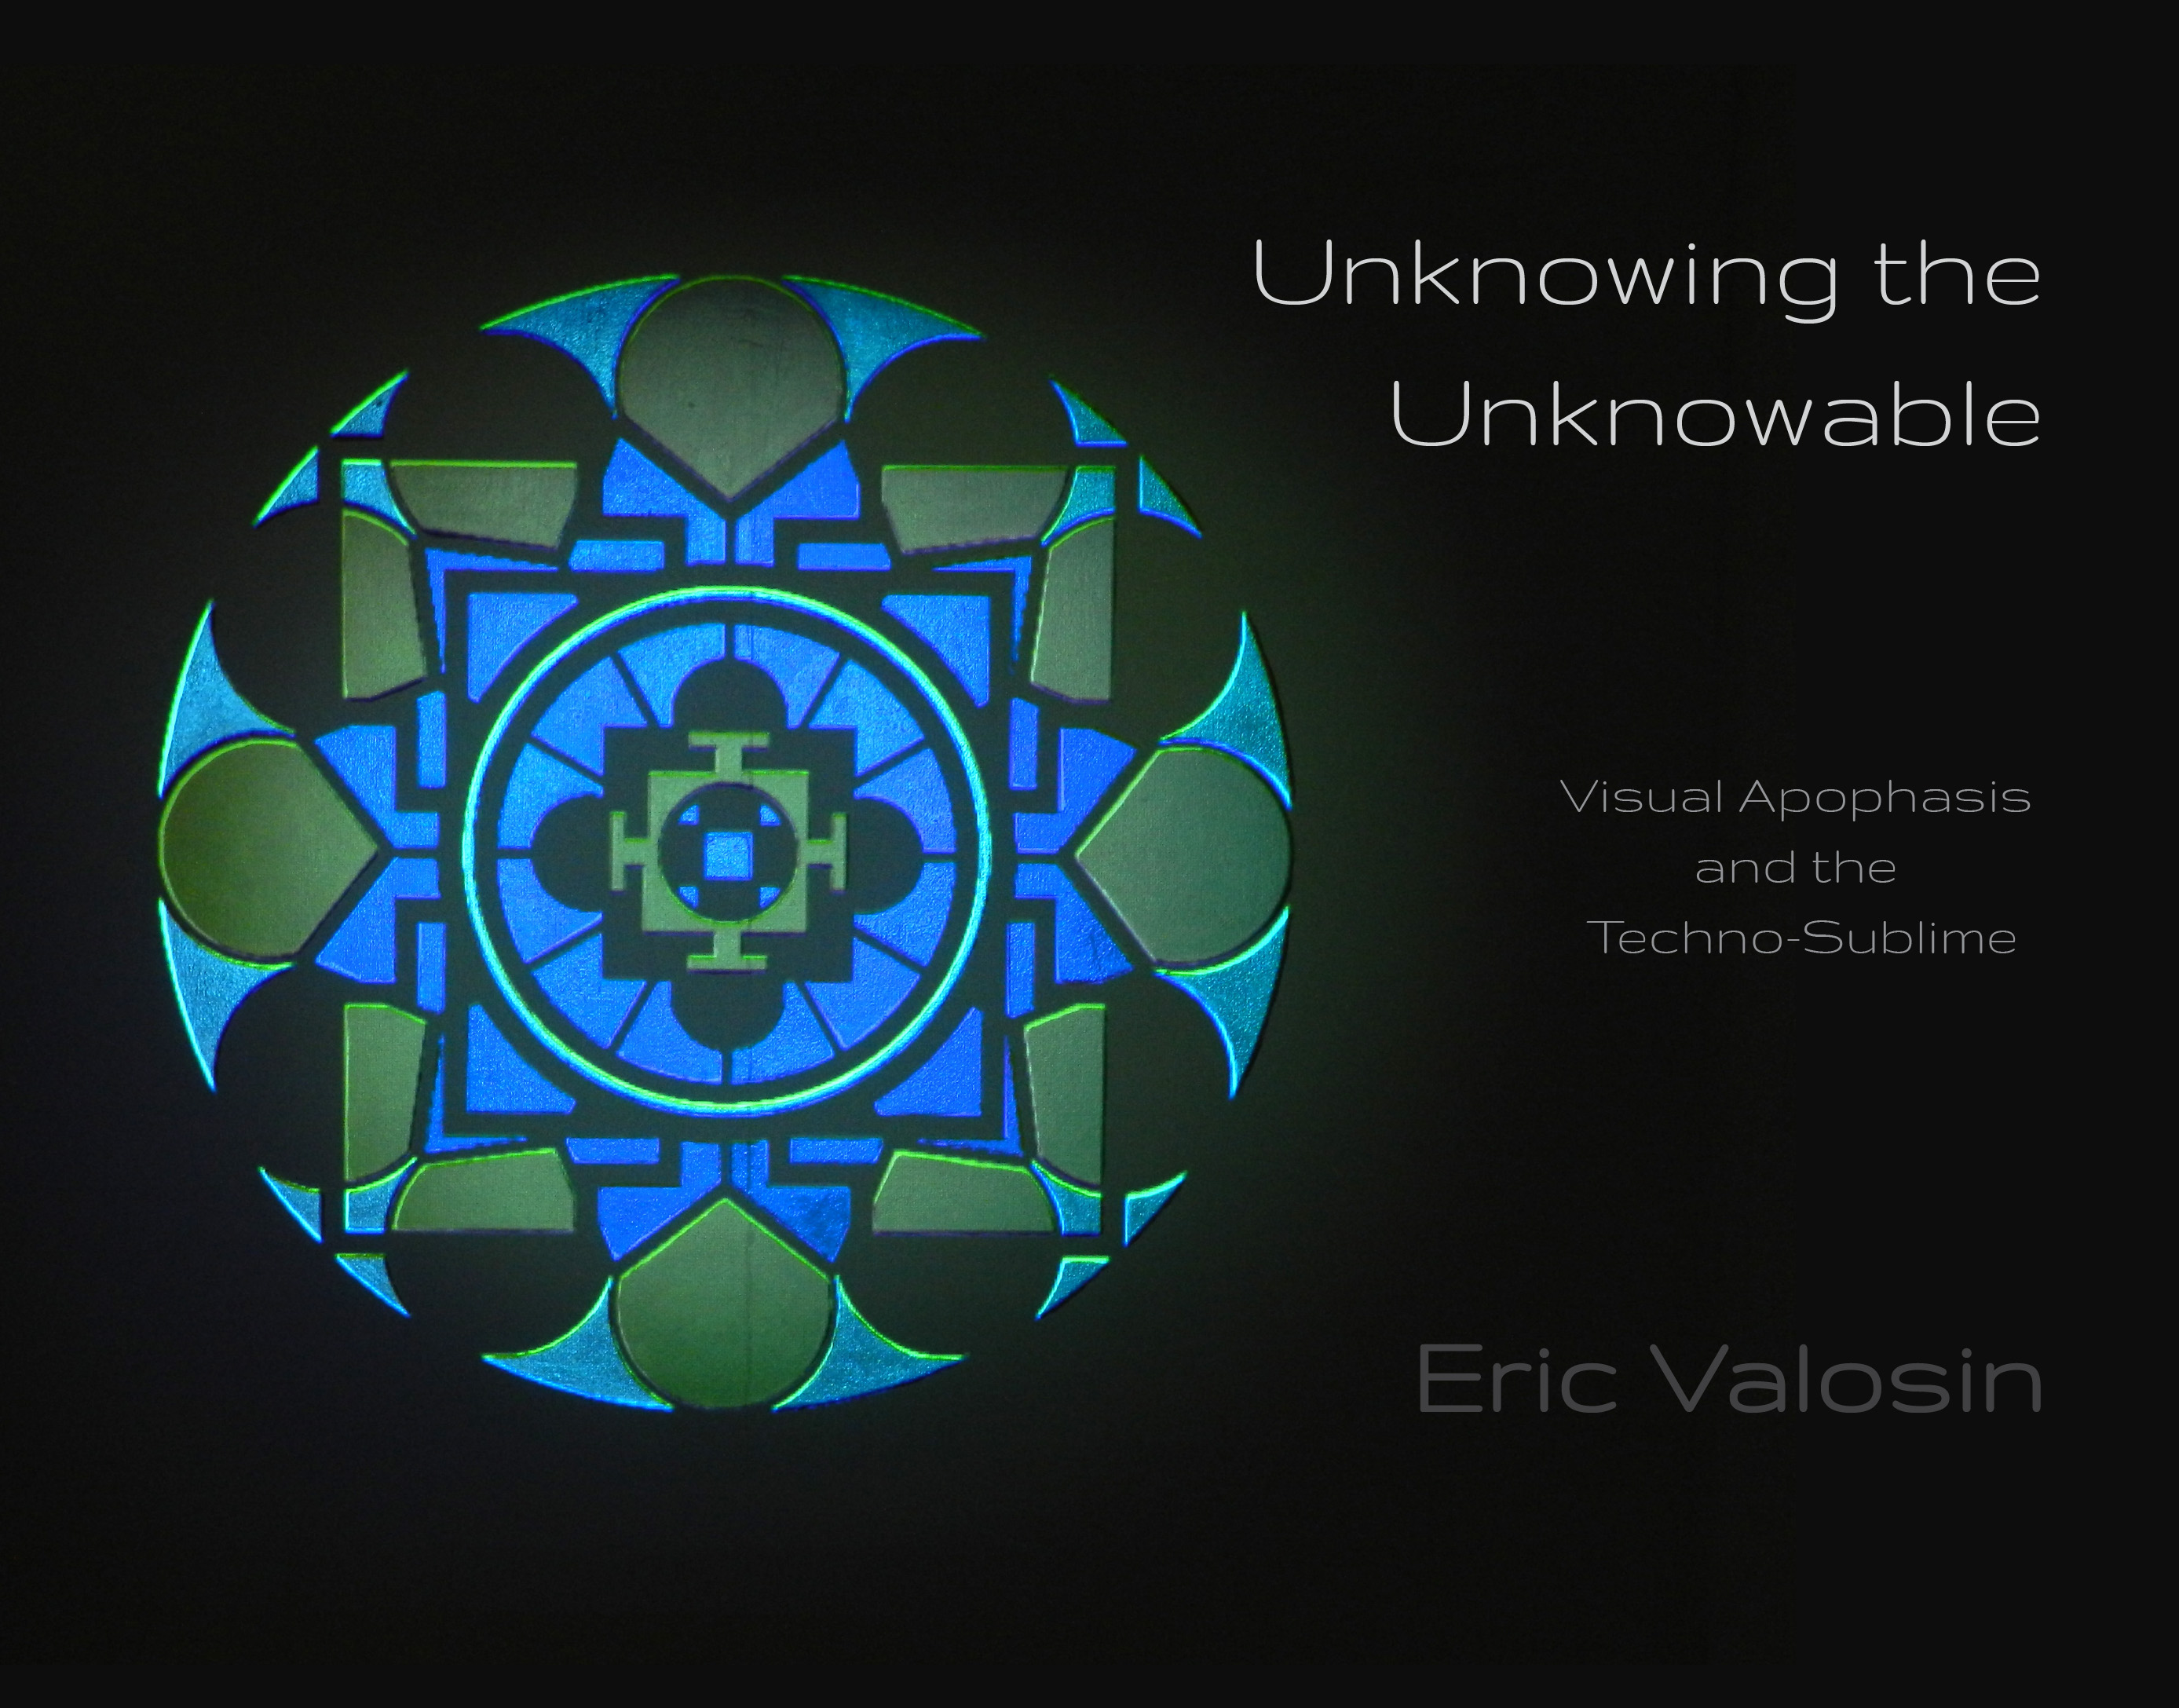 Unknowing the Unknowable: Visual Apophasis and the Techno-Sublime